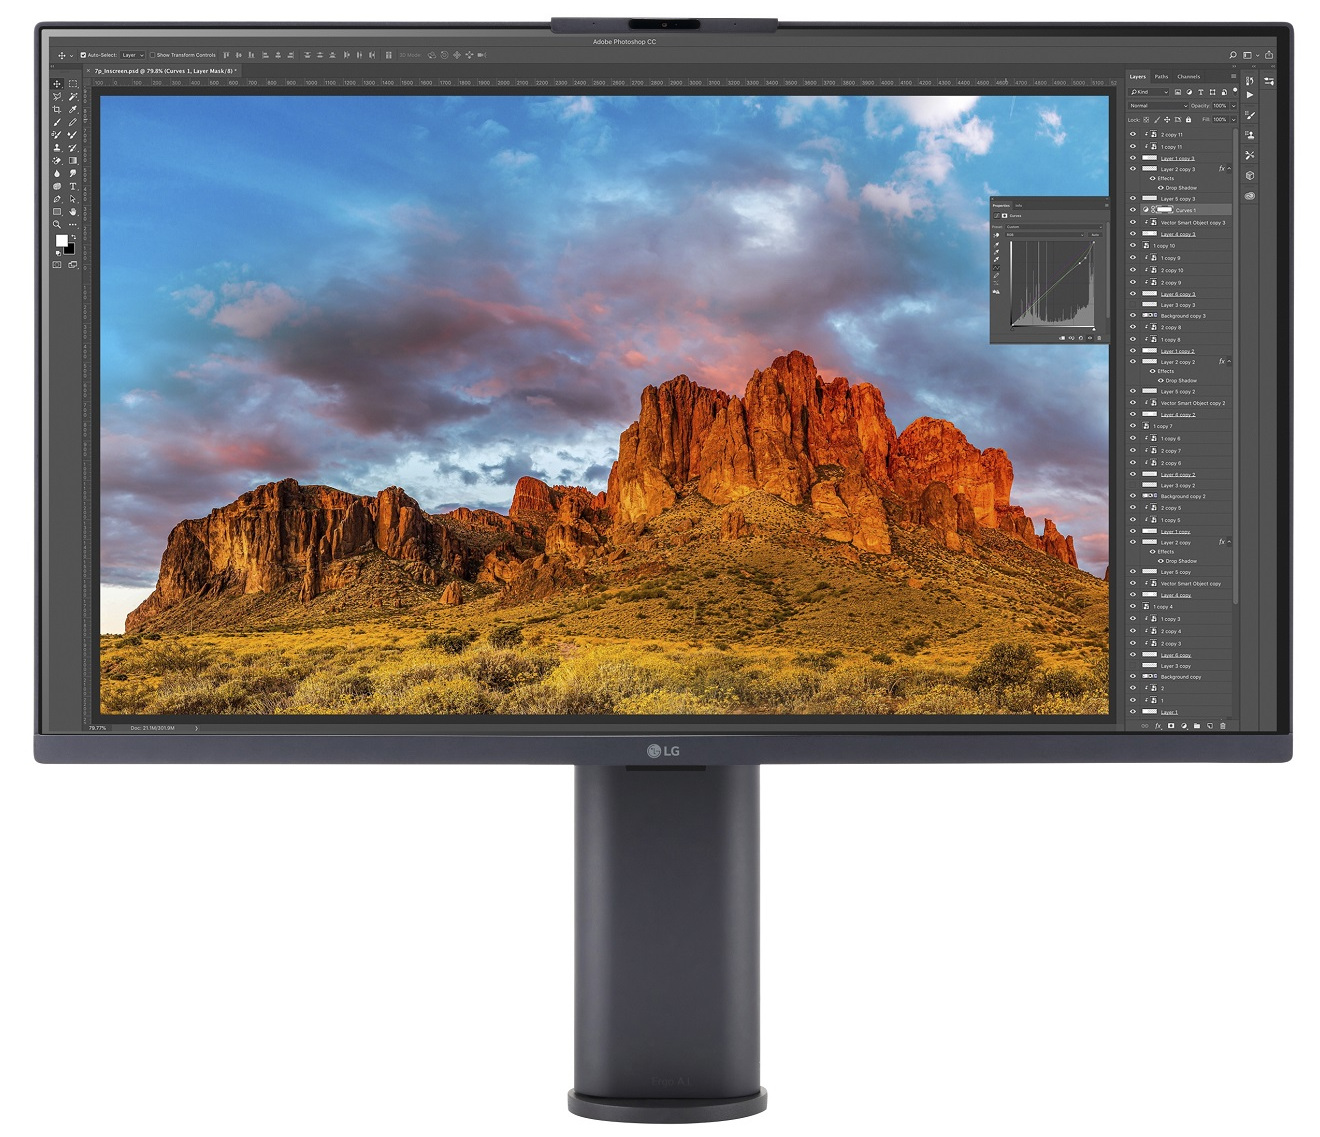 New LG monitor independently adjusts to the optimal viewing position via AI